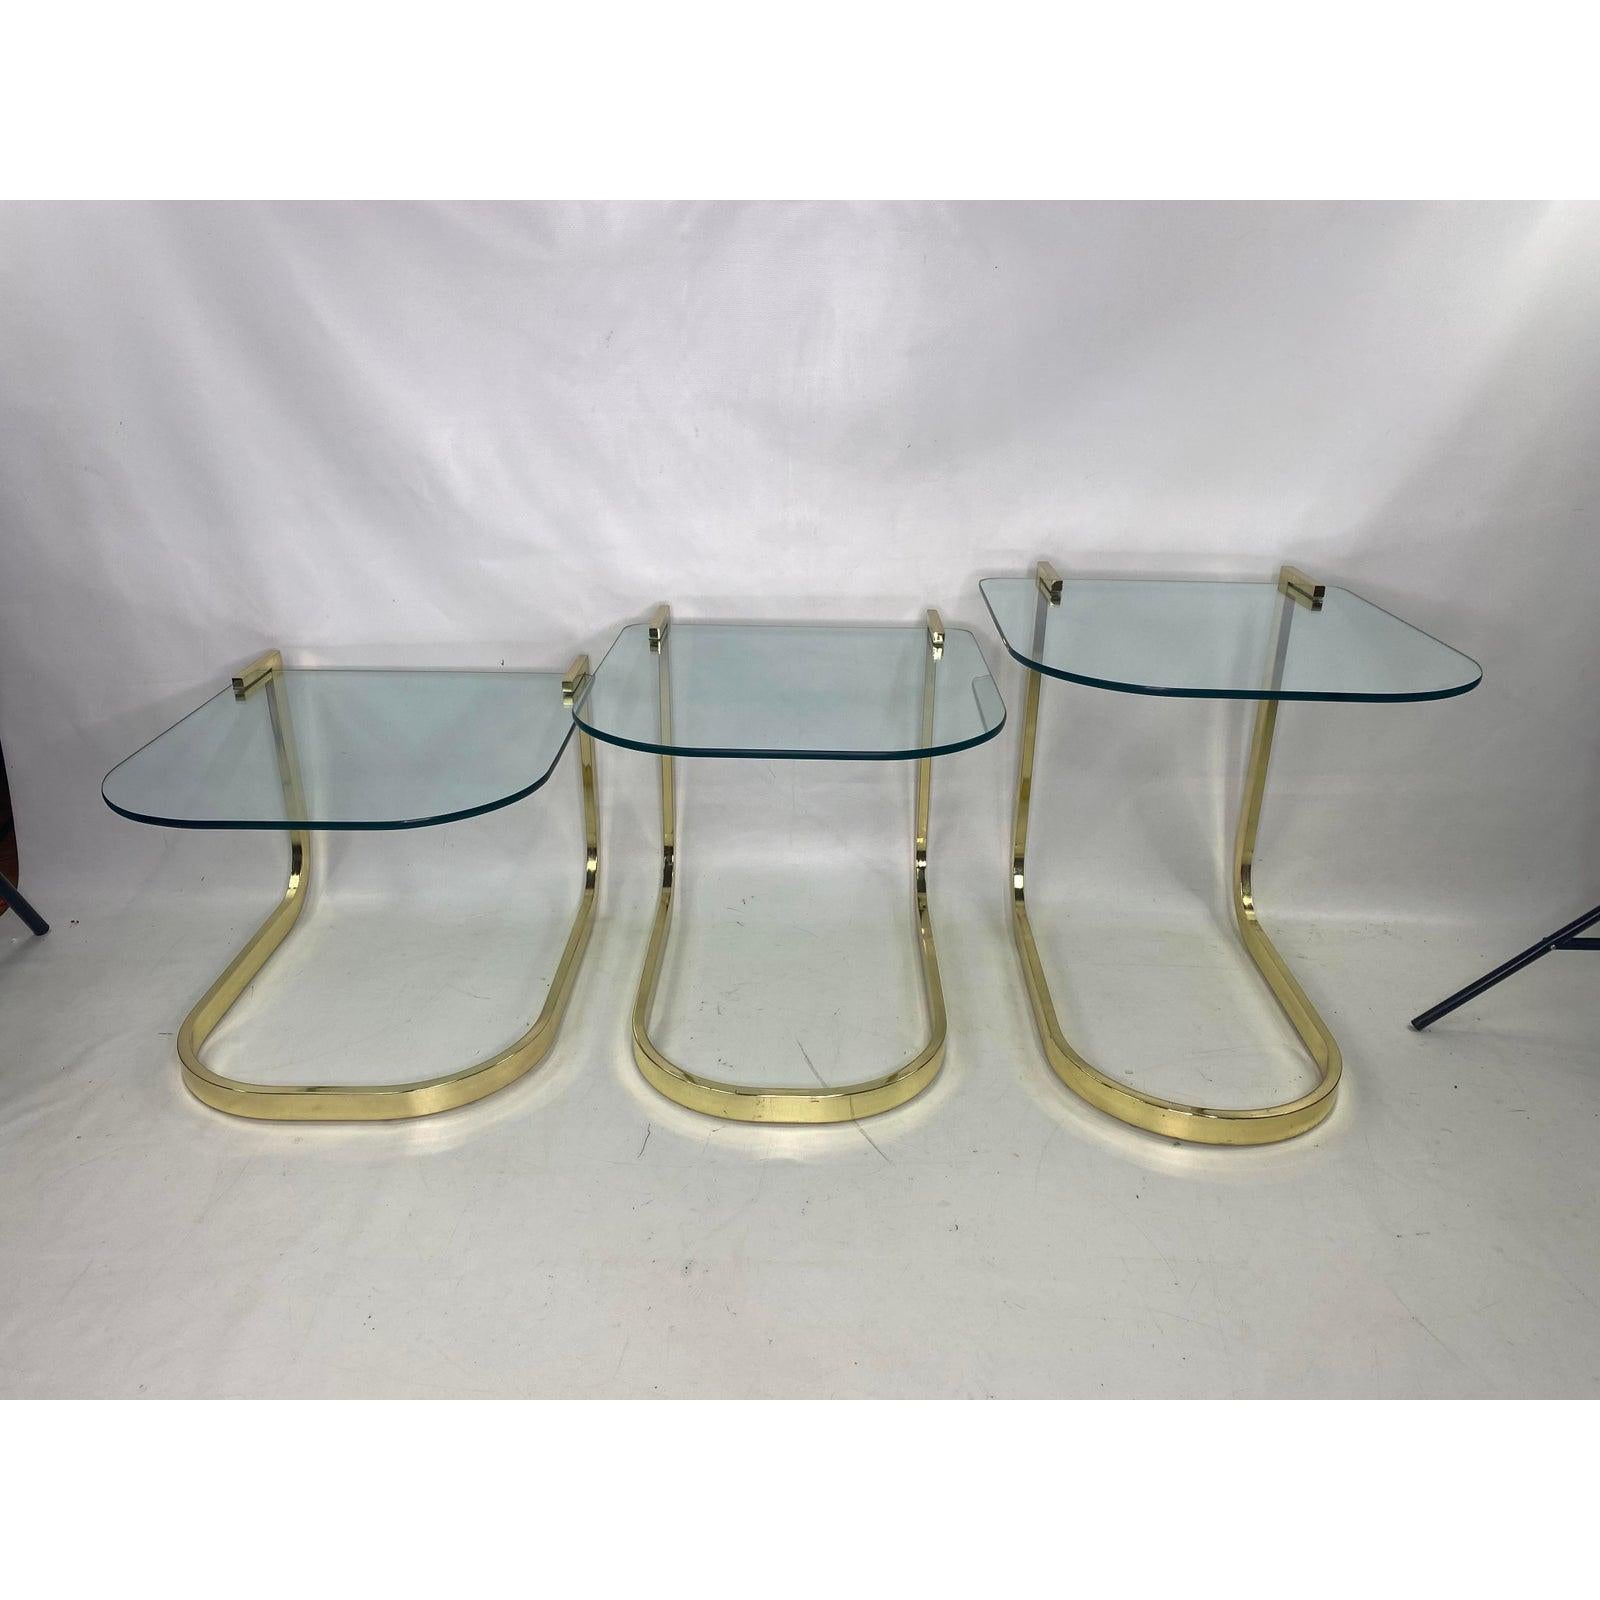 Mid-Century Glass and Brass Nesting Tables by Design Institute America In Good Condition For Sale In Esperance, NY